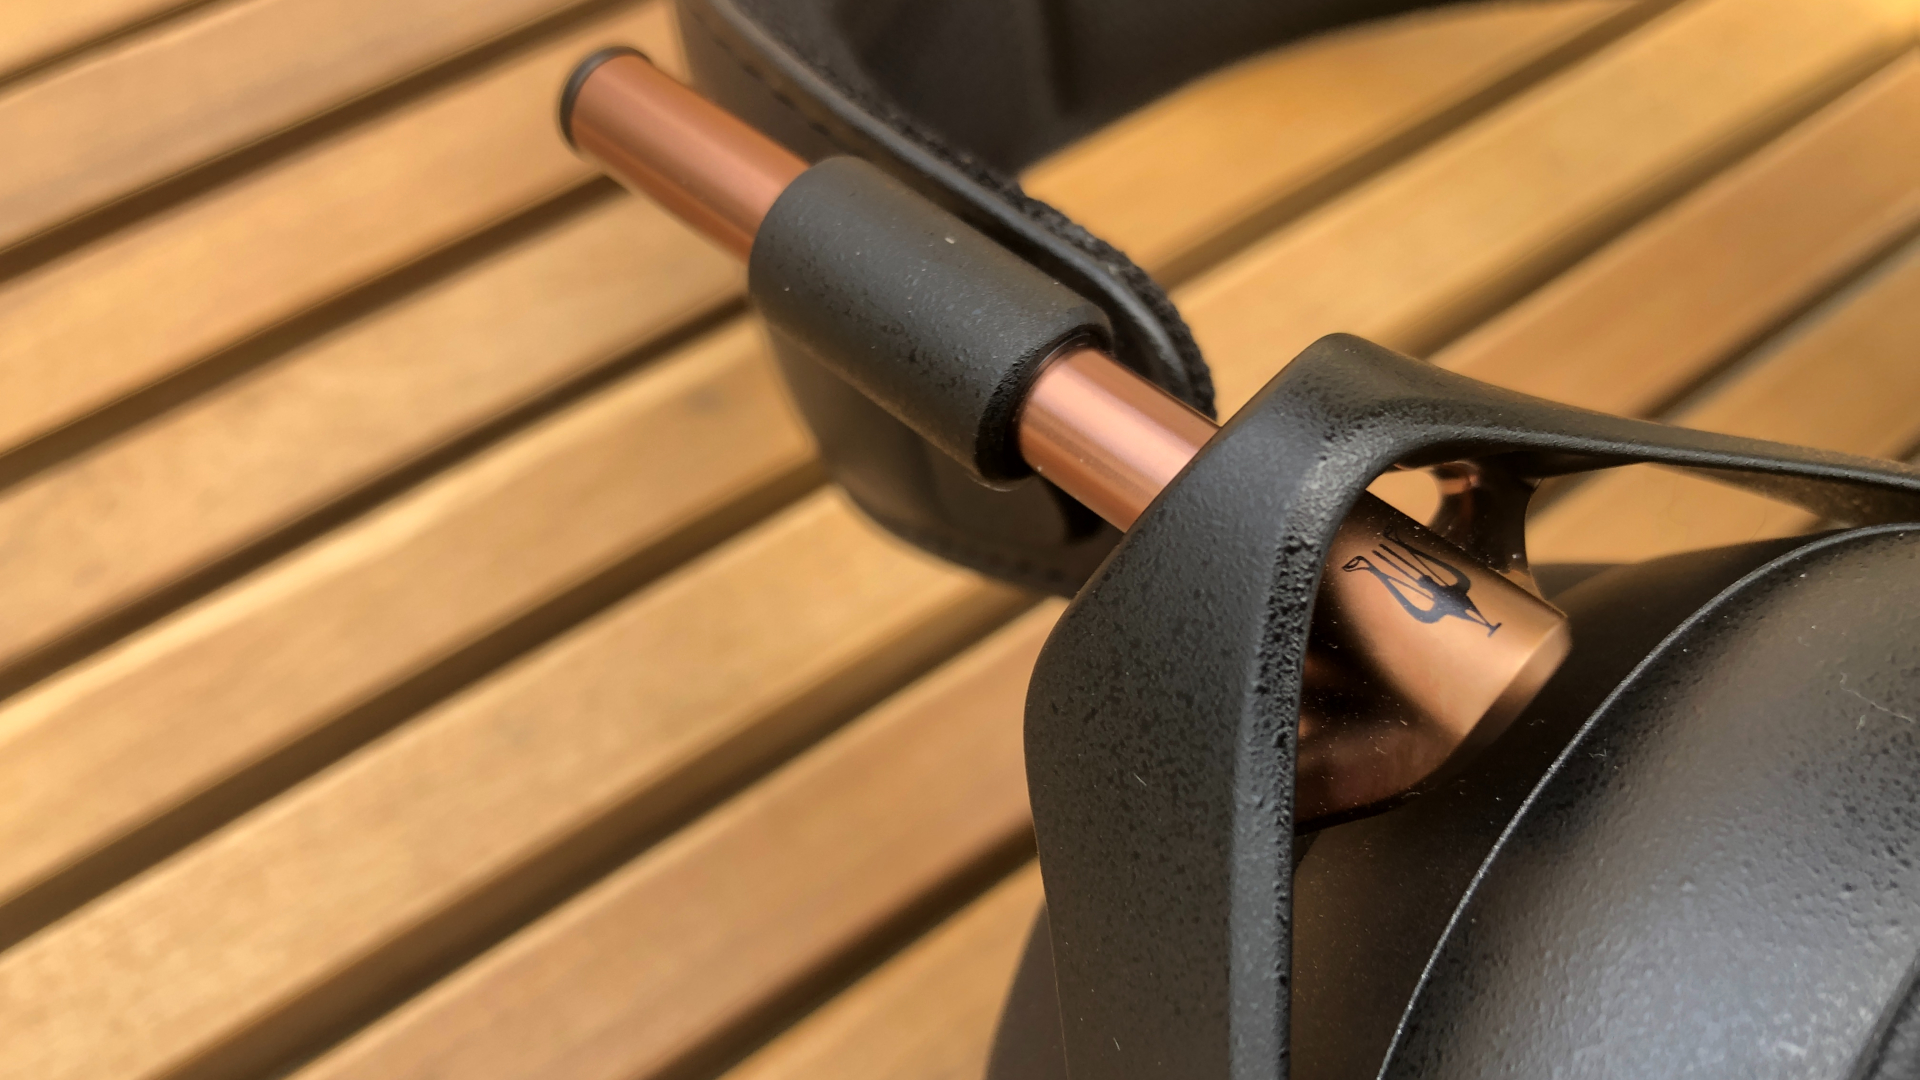 Details of the Meze Audio Liric headband on the outdoor table